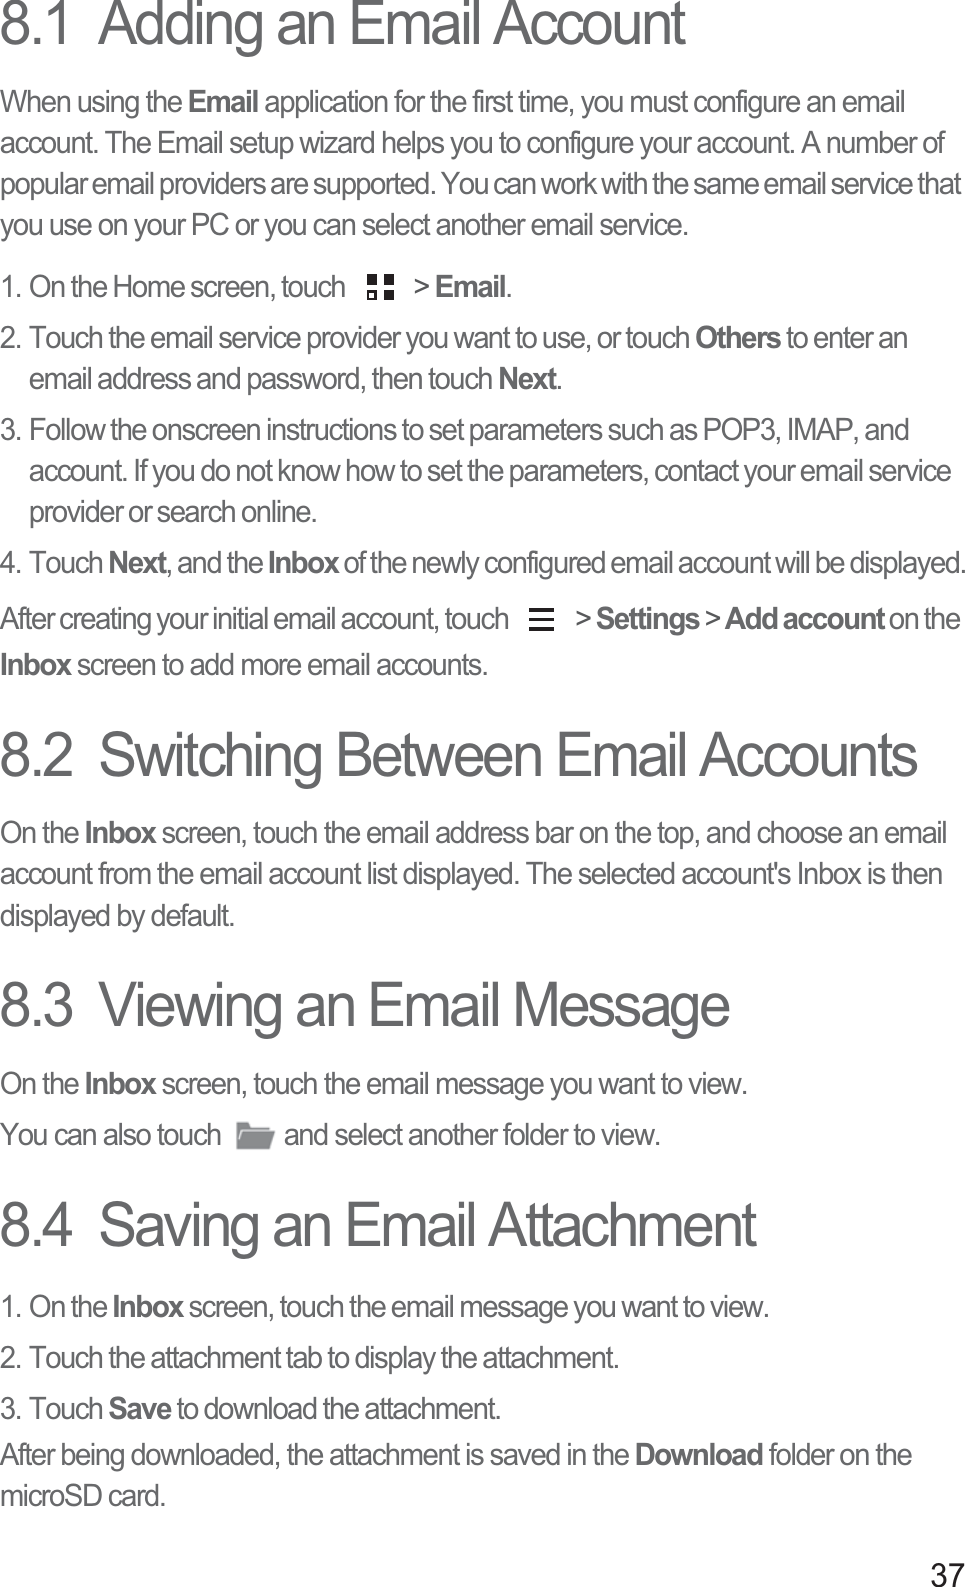 378.1  Adding an Email AccountWhen using the Email application for the first time, you must configure an email account. The Email setup wizard helps you to configure your account. A number of popular email providers are supported. You can work with the same email service that you use on your PC or you can select another email service.1. On the Home screen, touch   &gt; Email. 2. Touch the email service provider you want to use, or touch Others to enter an email address and password, then touch Next. 3. Follow the onscreen instructions to set parameters such as POP3, IMAP, and account. If you do not know how to set the parameters, contact your email service provider or search online. 4. Touch Next, and the Inbox of the newly configured email account will be displayed.After creating your initial email account, touch   &gt; Settings &gt; Add account on the Inbox screen to add more email accounts.8.2  Switching Between Email AccountsOn the Inbox screen, touch the email address bar on the top, and choose an email account from the email account list displayed. The selected account&apos;s Inbox is then displayed by default.8.3  Viewing an Email MessageOn the Inbox screen, touch the email message you want to view. You can also touch  and select another folder to view. 8.4  Saving an Email Attachment1. On the Inbox screen, touch the email message you want to view. 2. Touch the attachment tab to display the attachment. 3. Touch Save to download the attachment. After being downloaded, the attachment is saved in the Download folder on the microSD card. 